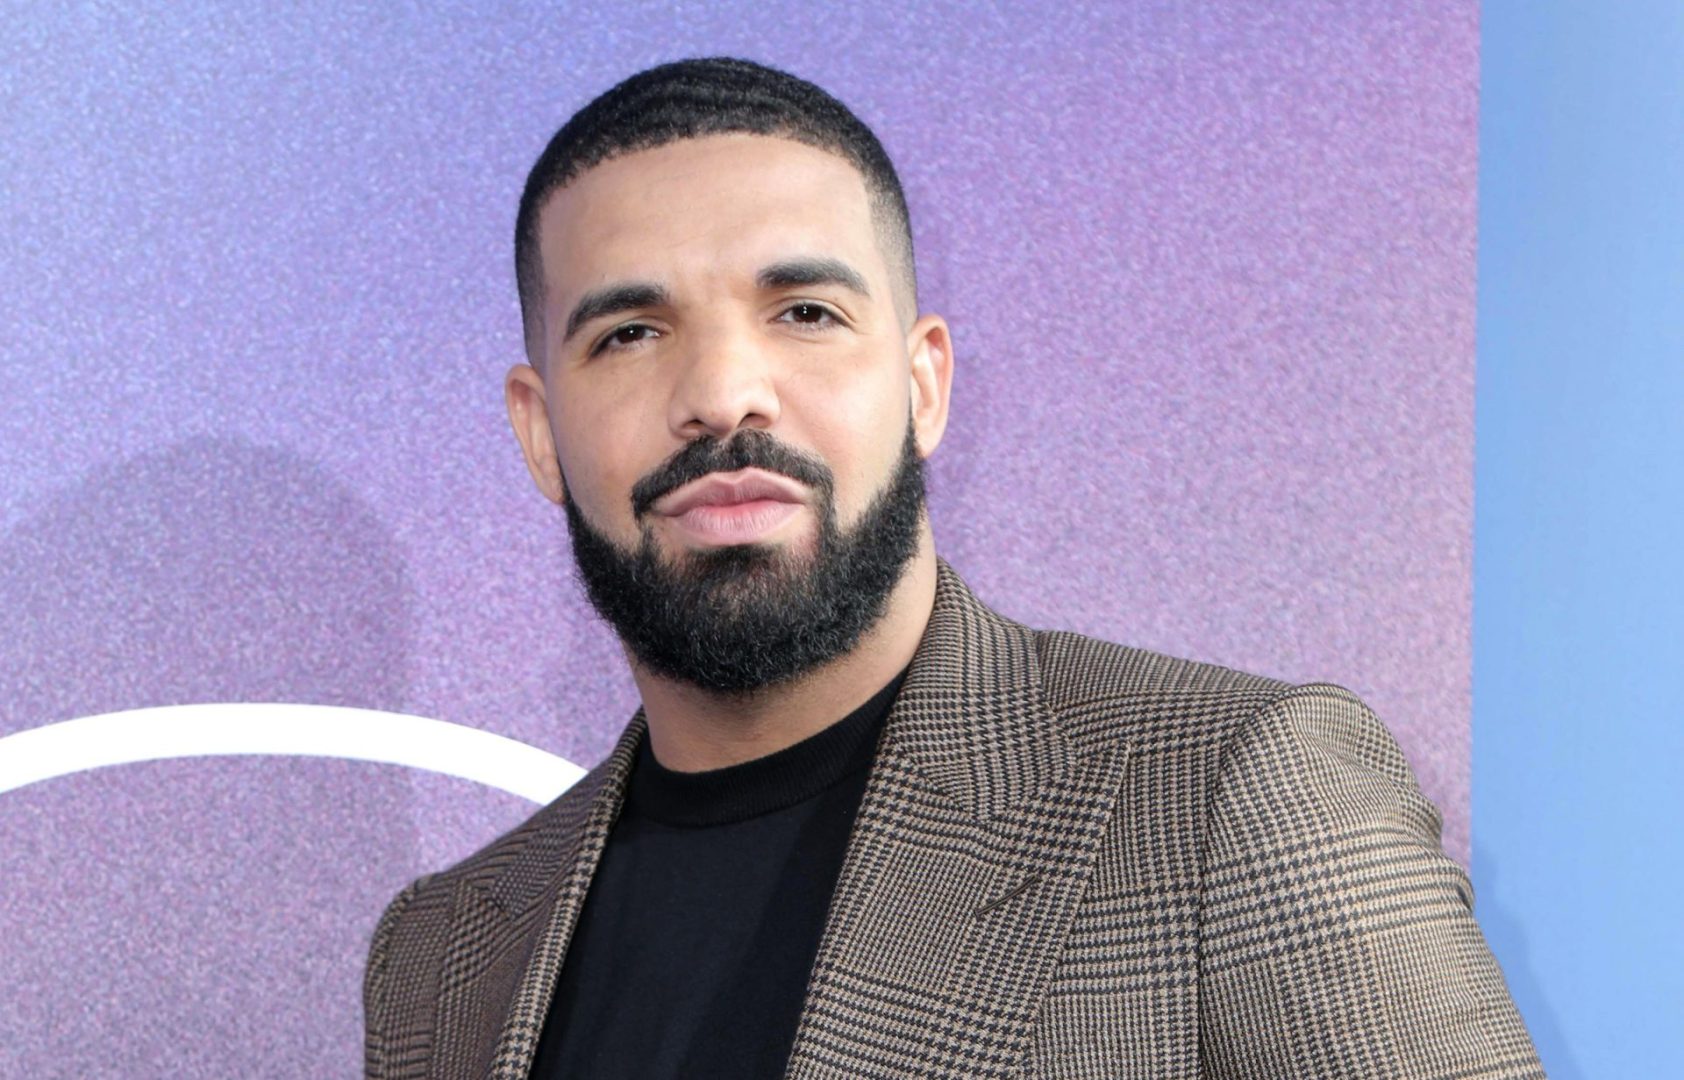 Drake clowned by fans for 'Minnie Mouse' look (photos)